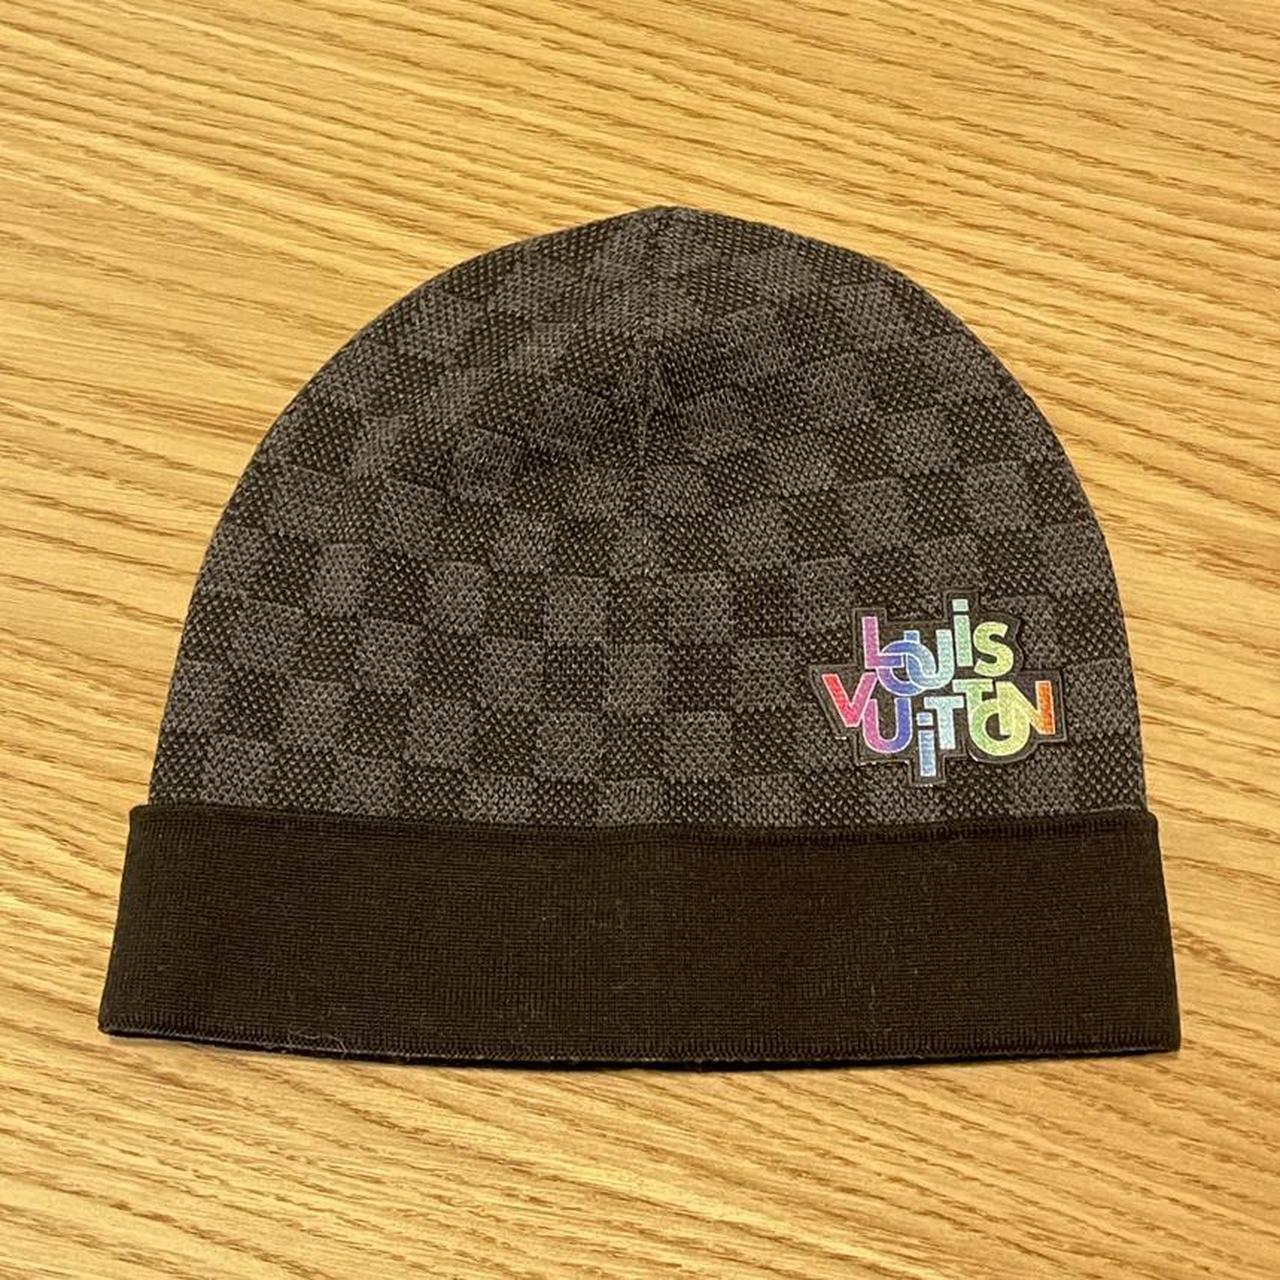 BRAND NEW Louis Vuitton Beanie. , 100% Authentic and